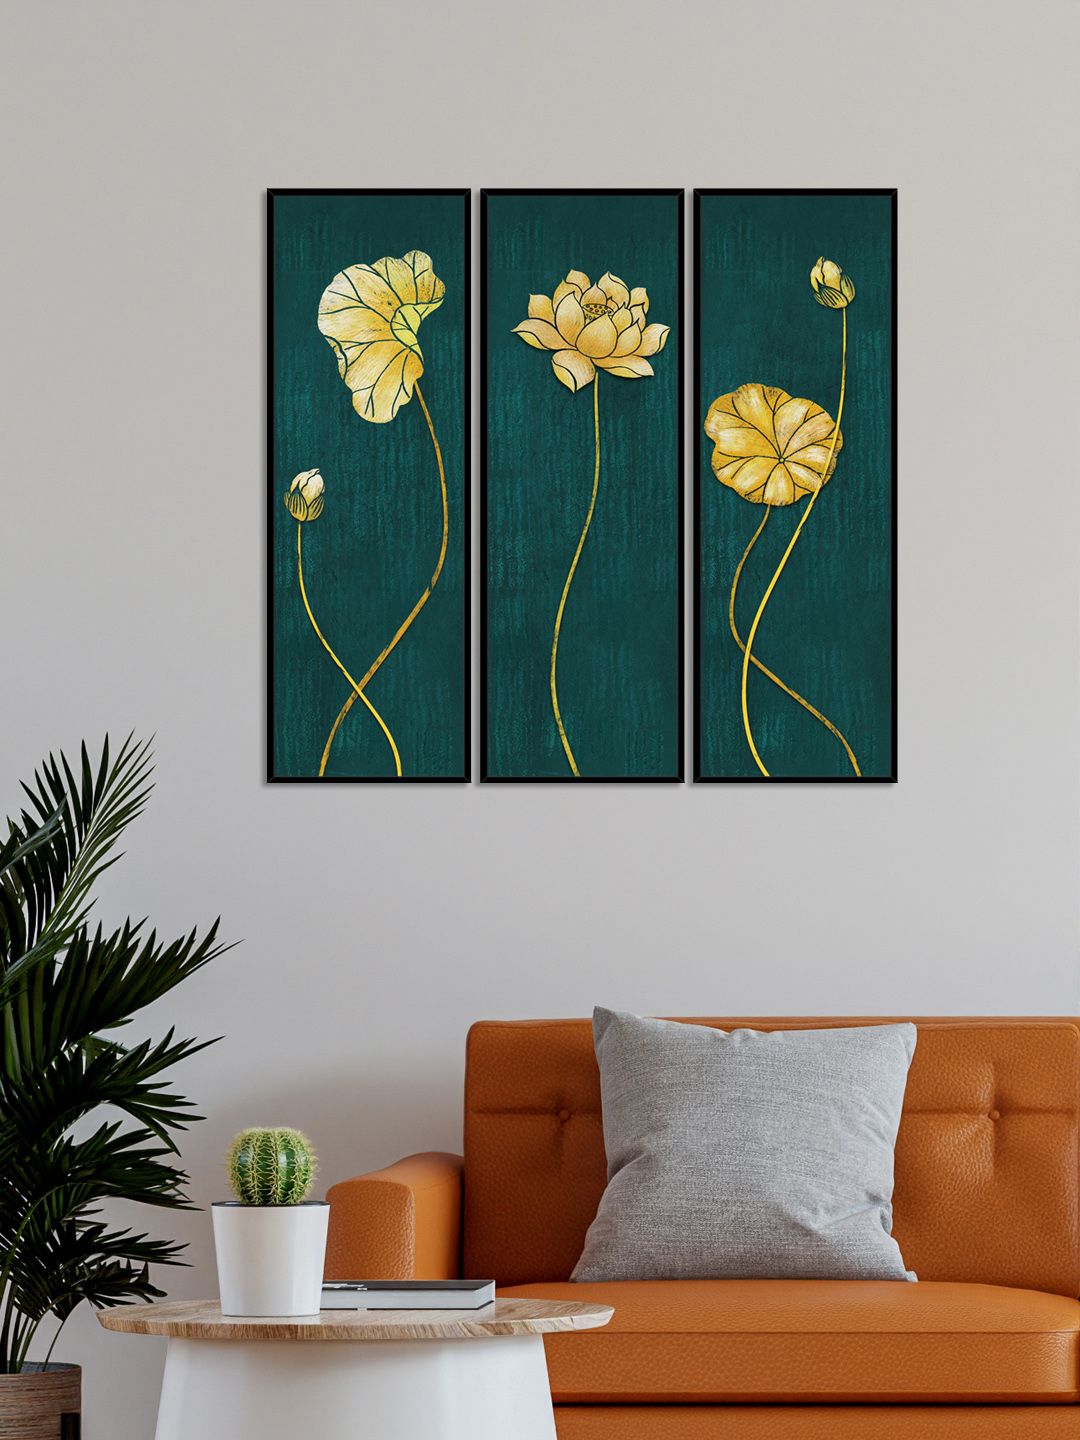 999Store Set Of 3 Green & Yellow Golden Lotus Wall Art Price in India